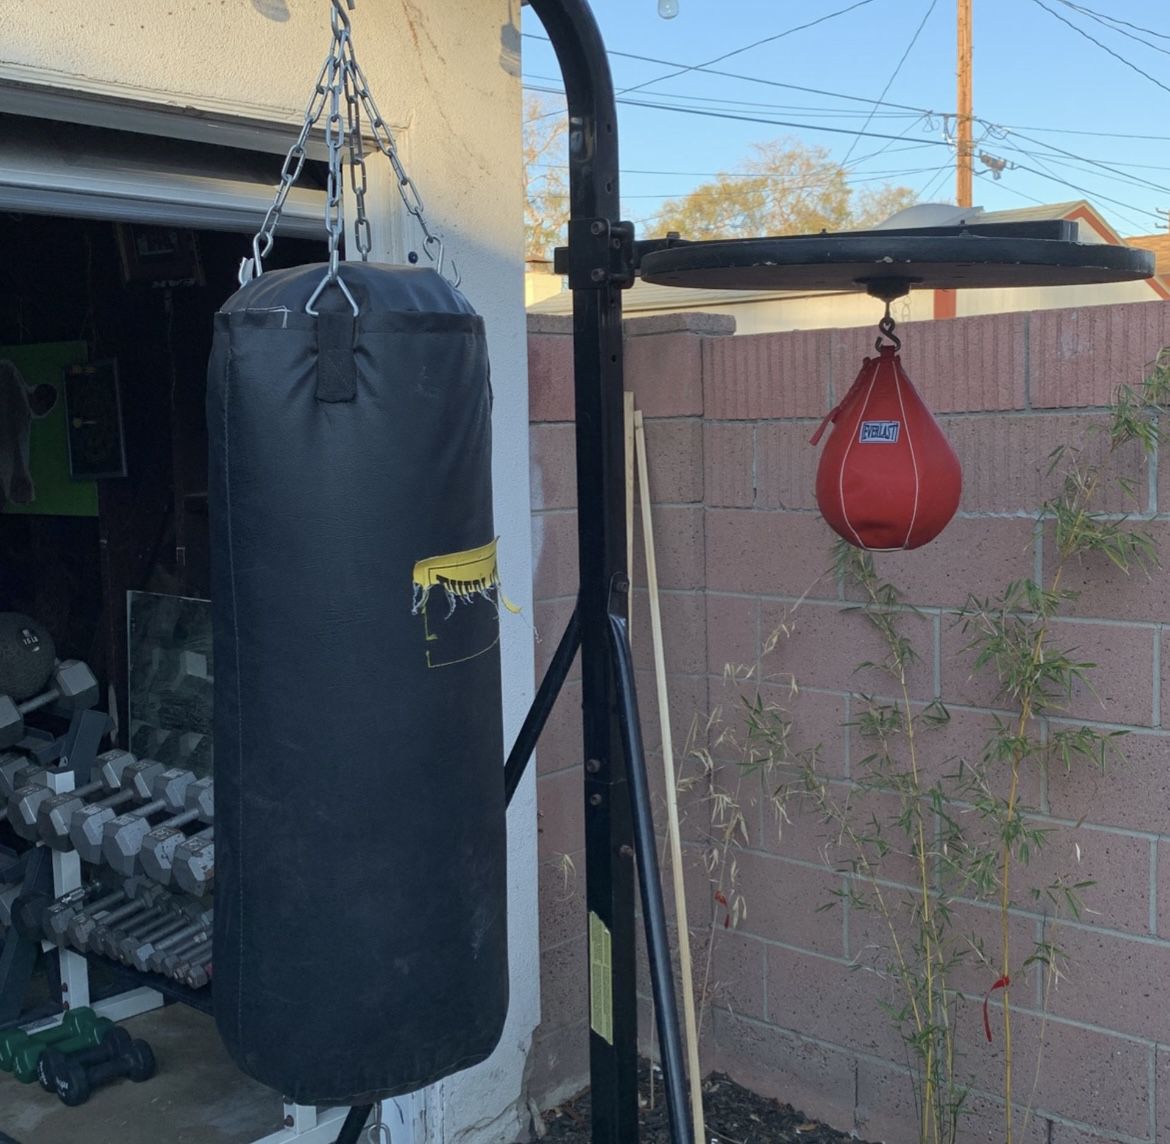 Boxing Punching bag and self standing bag stand with speed bag